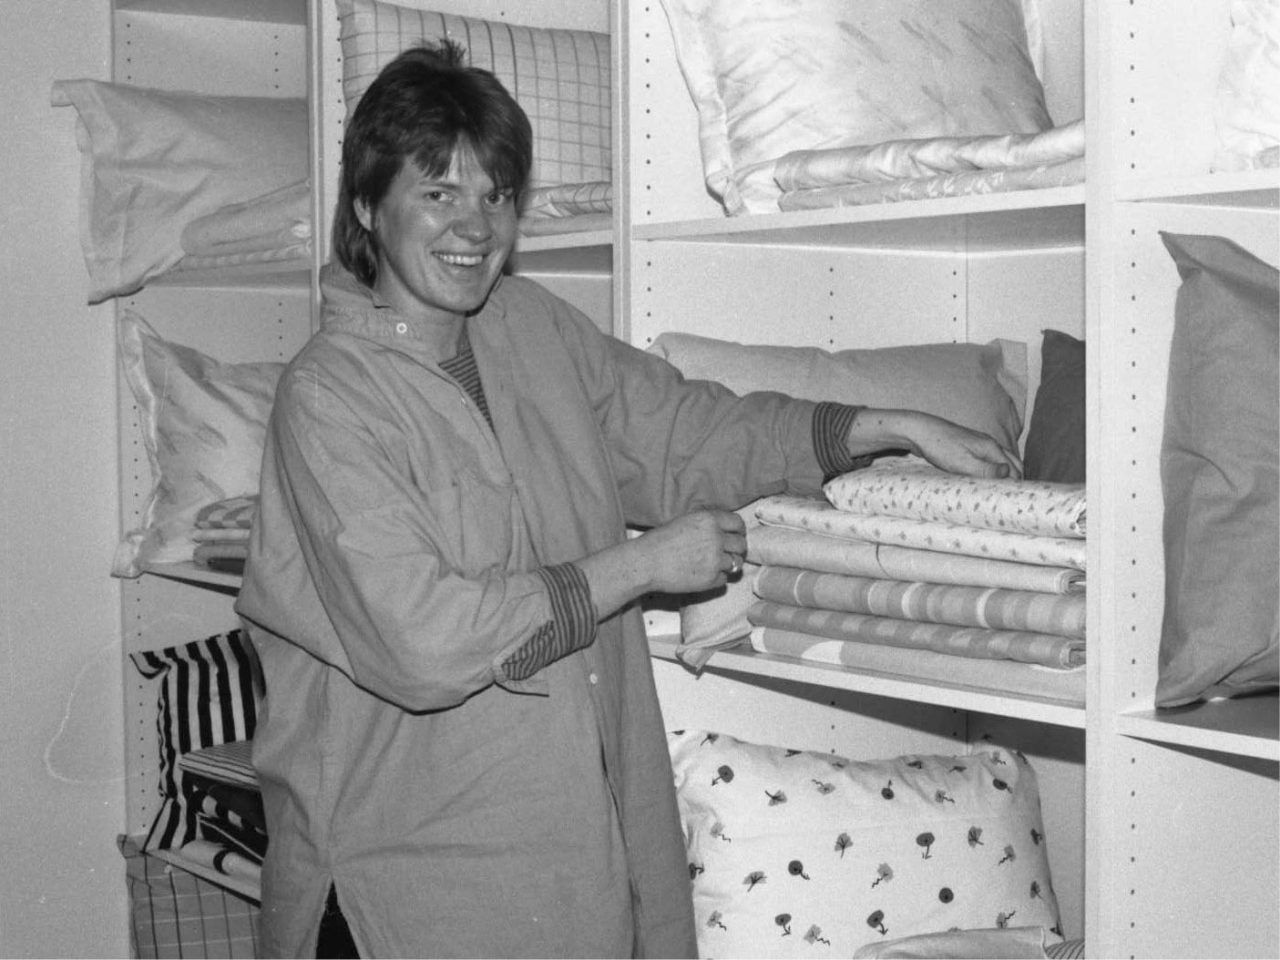 Irene Odd, with short hair, stands before shelves of fabric rolls.